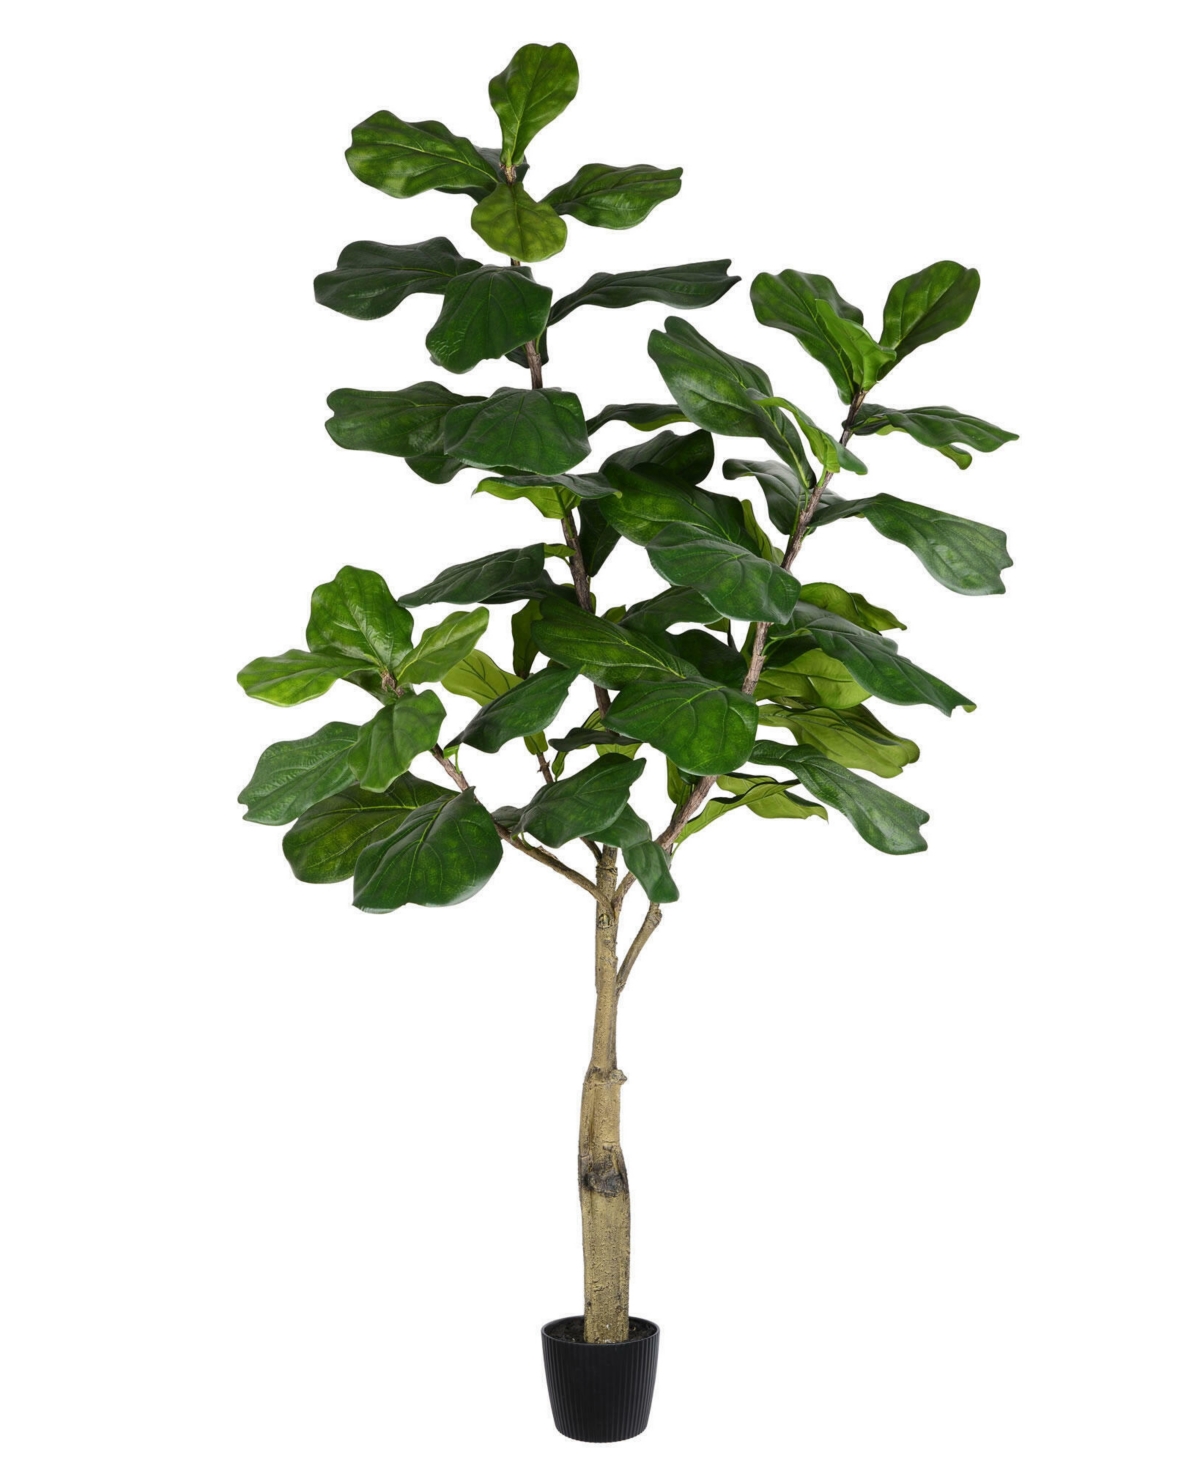 6' Artificial Potted Fiddle Tree